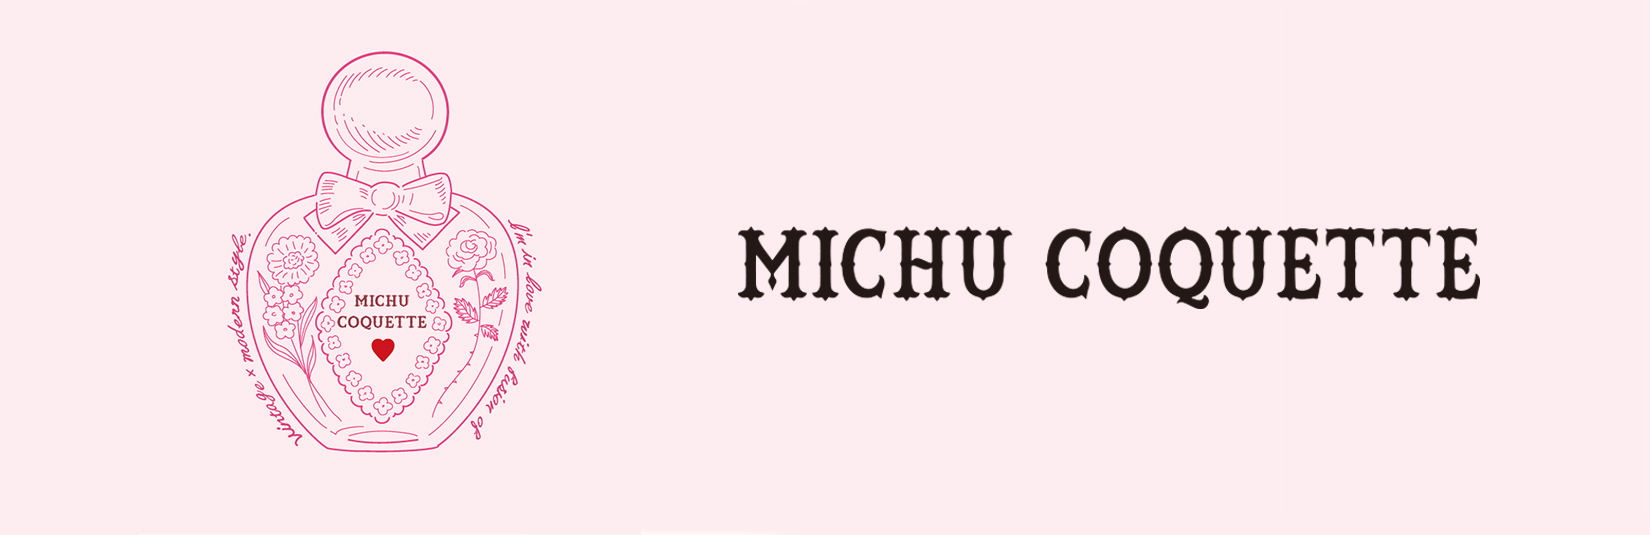 MICHU COQUETTE(ミチュ コケット)